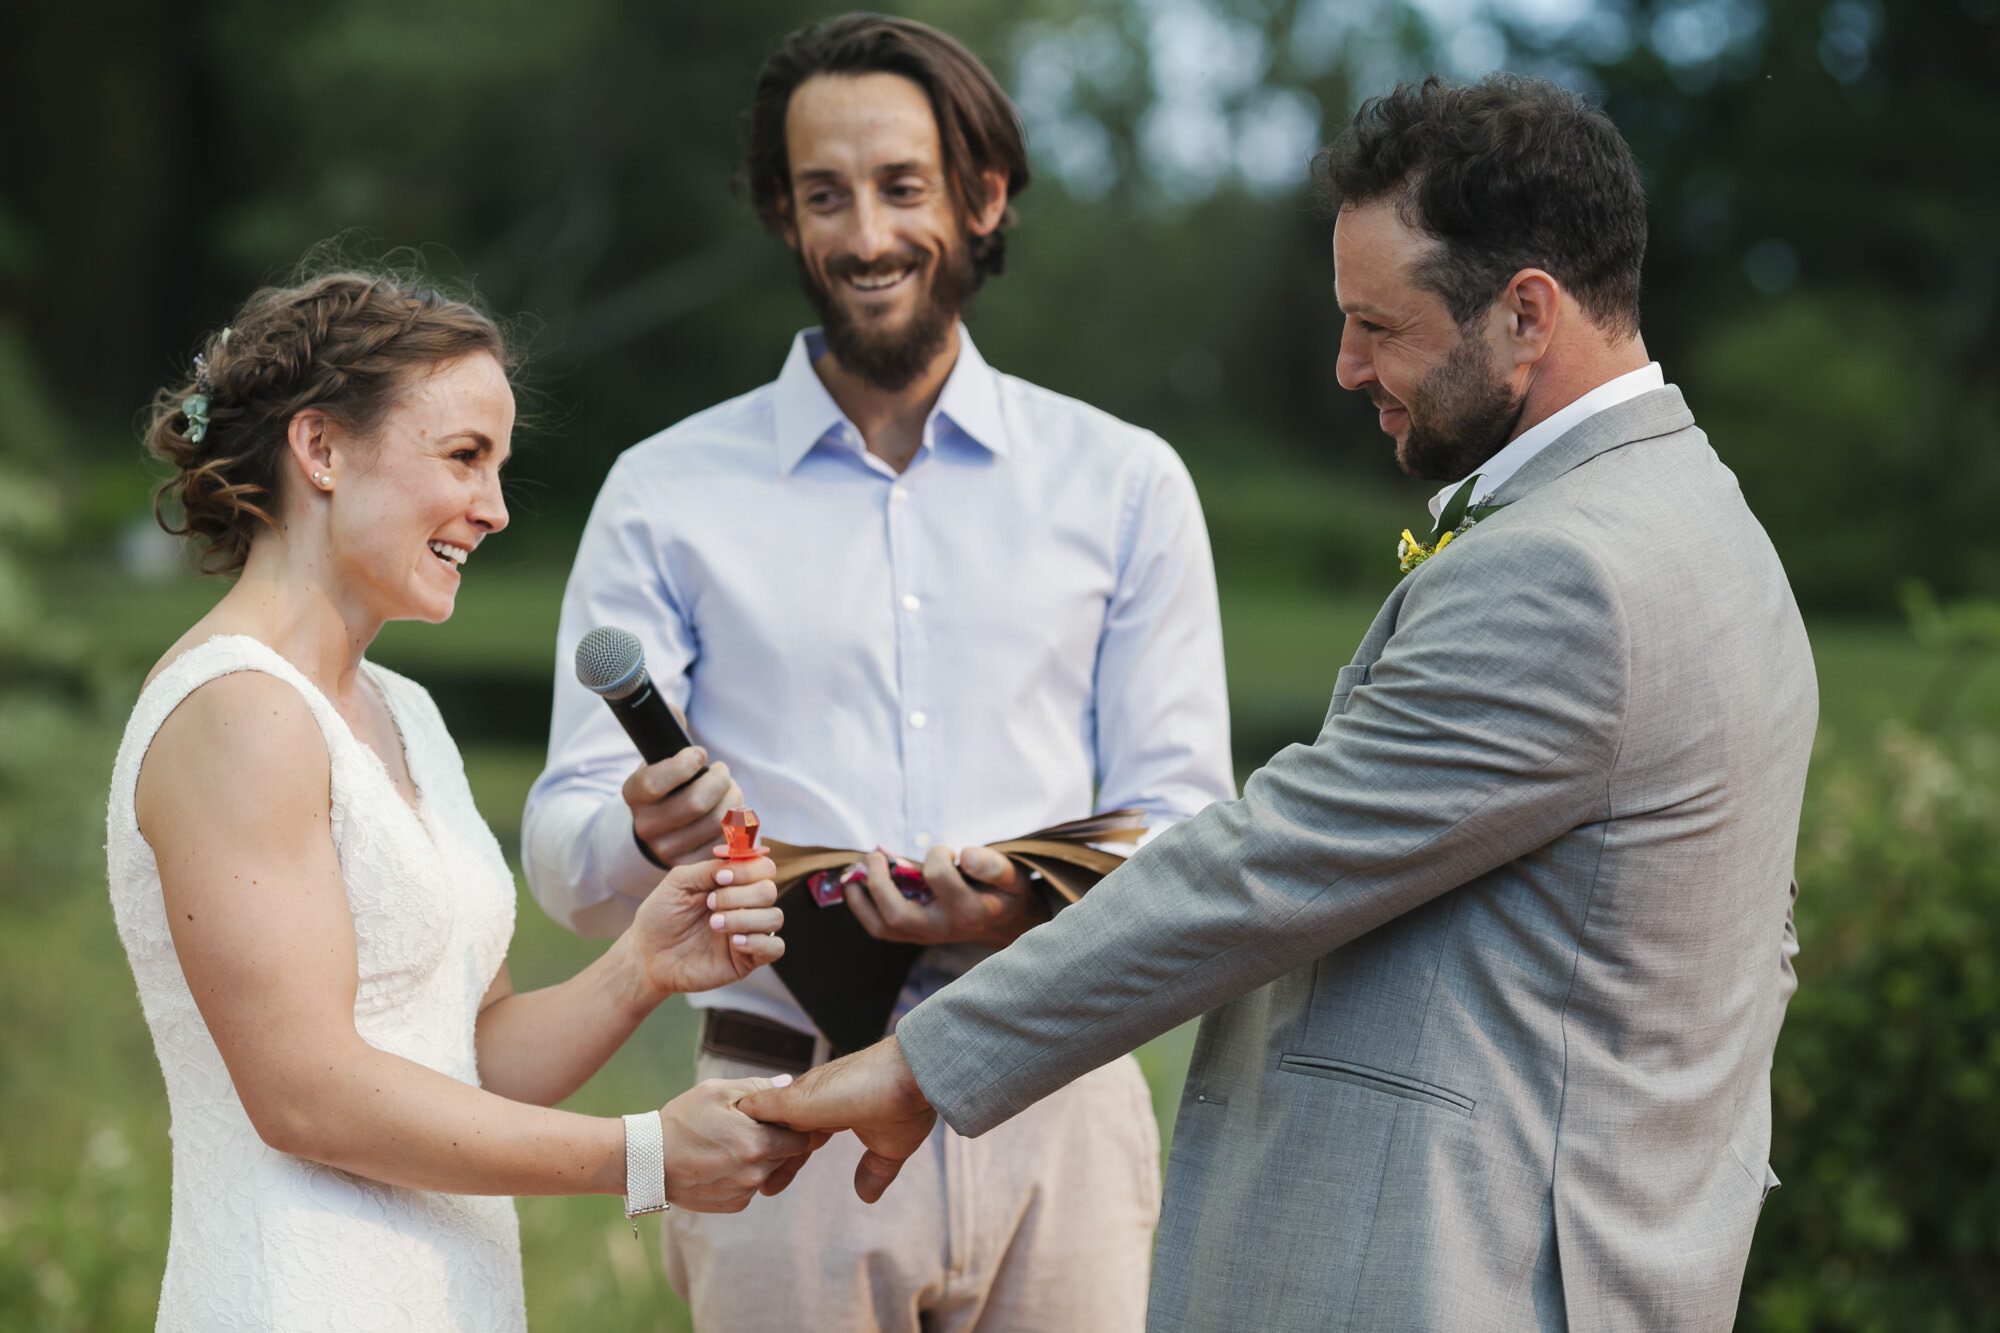 Groom surprises bride during ceremony with ring pop